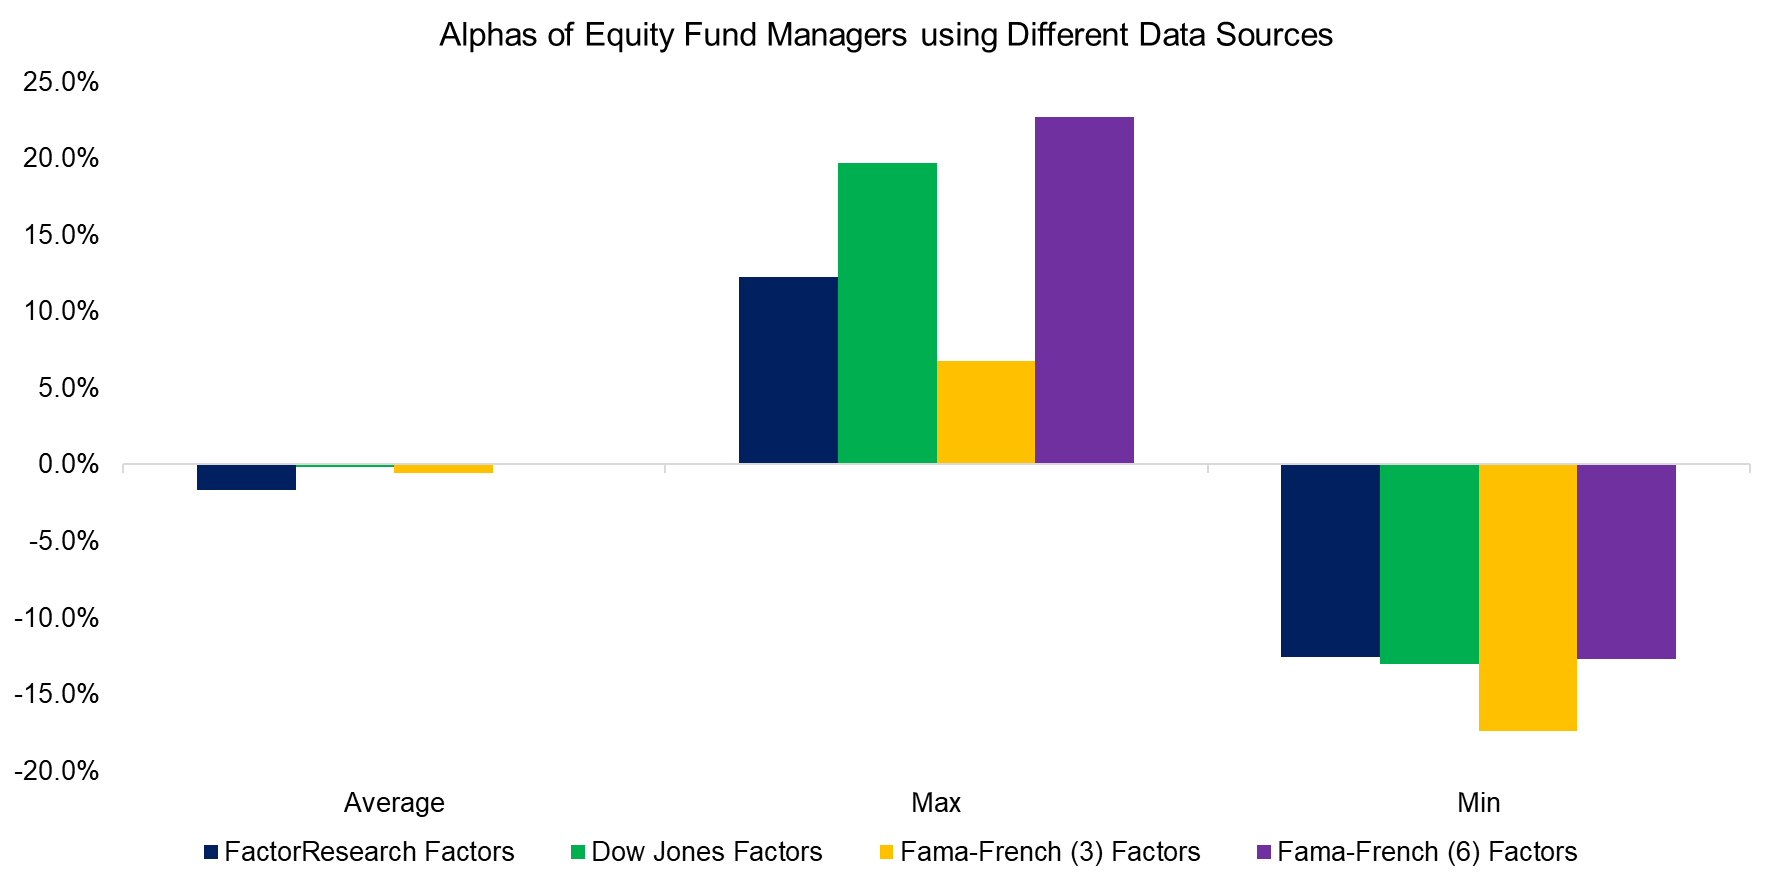 Alphas of Equity Fund Managers using Different Data Sources